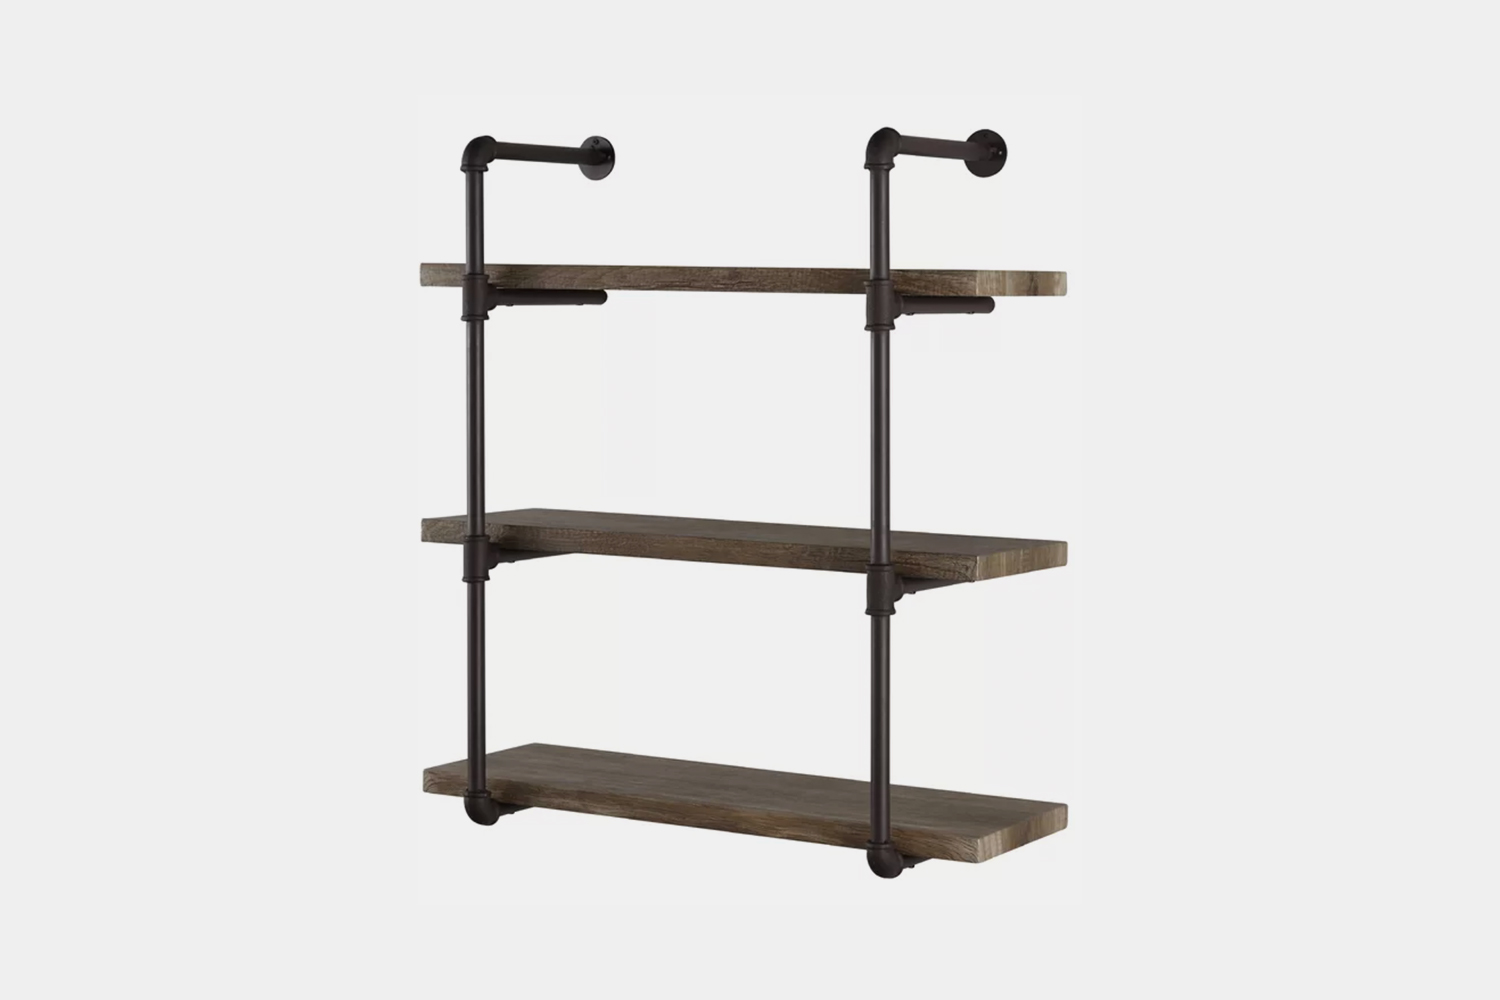 On Shelves And Organization, Wayfair Wire Shelving